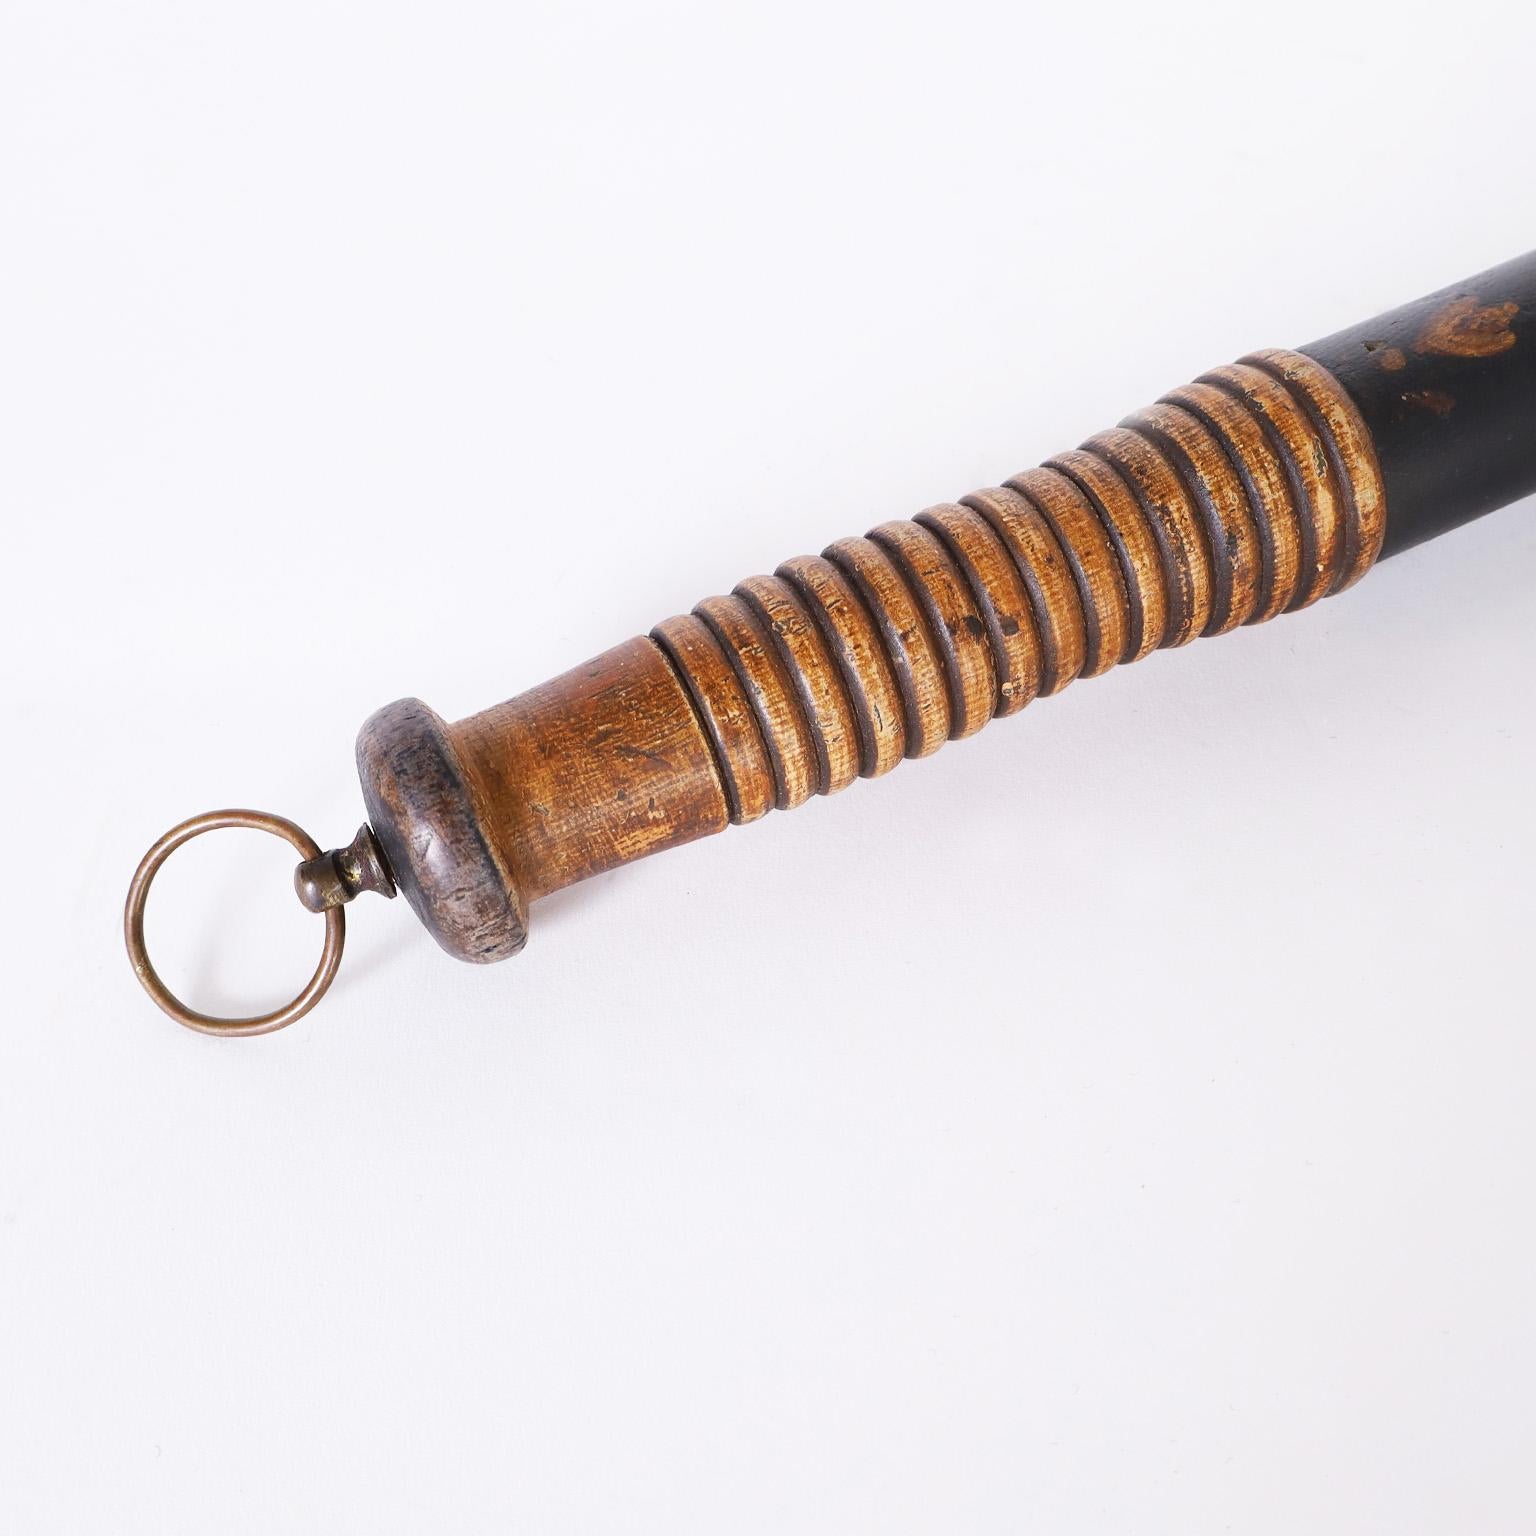 Rare and unusual antique billy club or truncheon bedecked with a polychrome technique, the coat of arms and motto ( Honi Soit Qui Mal Y) of the Order of the Garter, an order of Knighthood founded in 1348 by King Edward III.